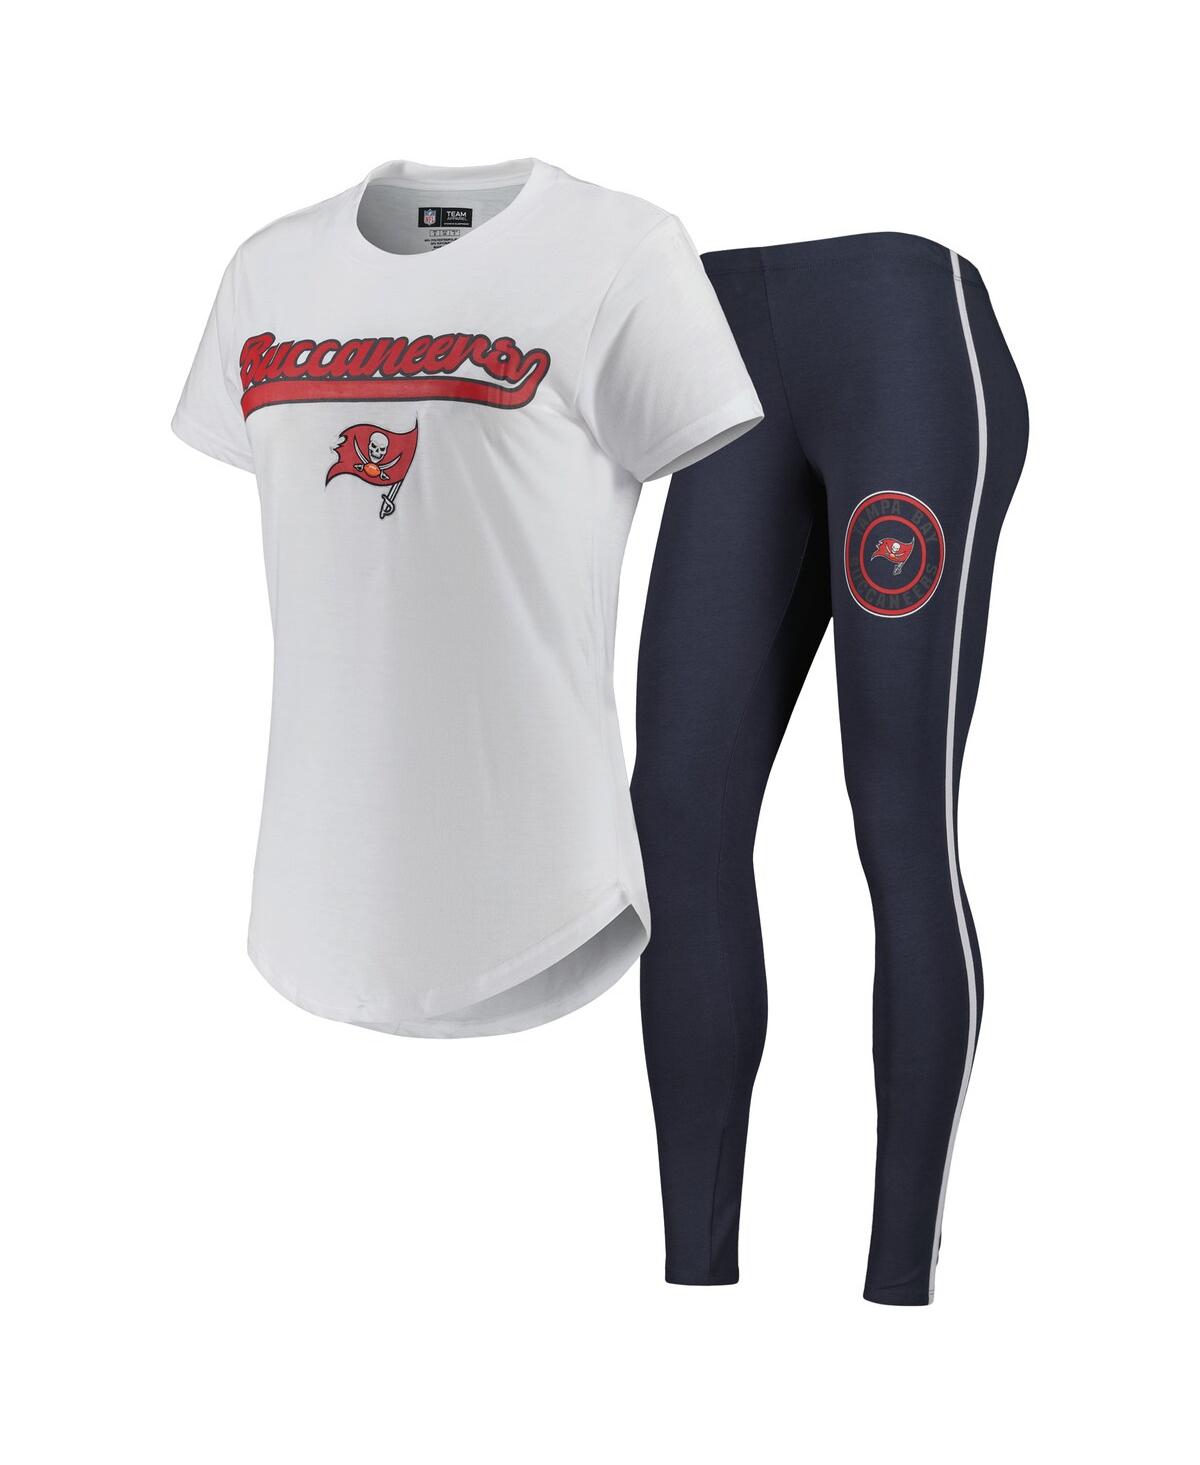 Women's Concepts Sport White, Charcoal Tampa Bay Buccaneers Sonata T-shirt and Leggings Sleep Set - White, Charcoal